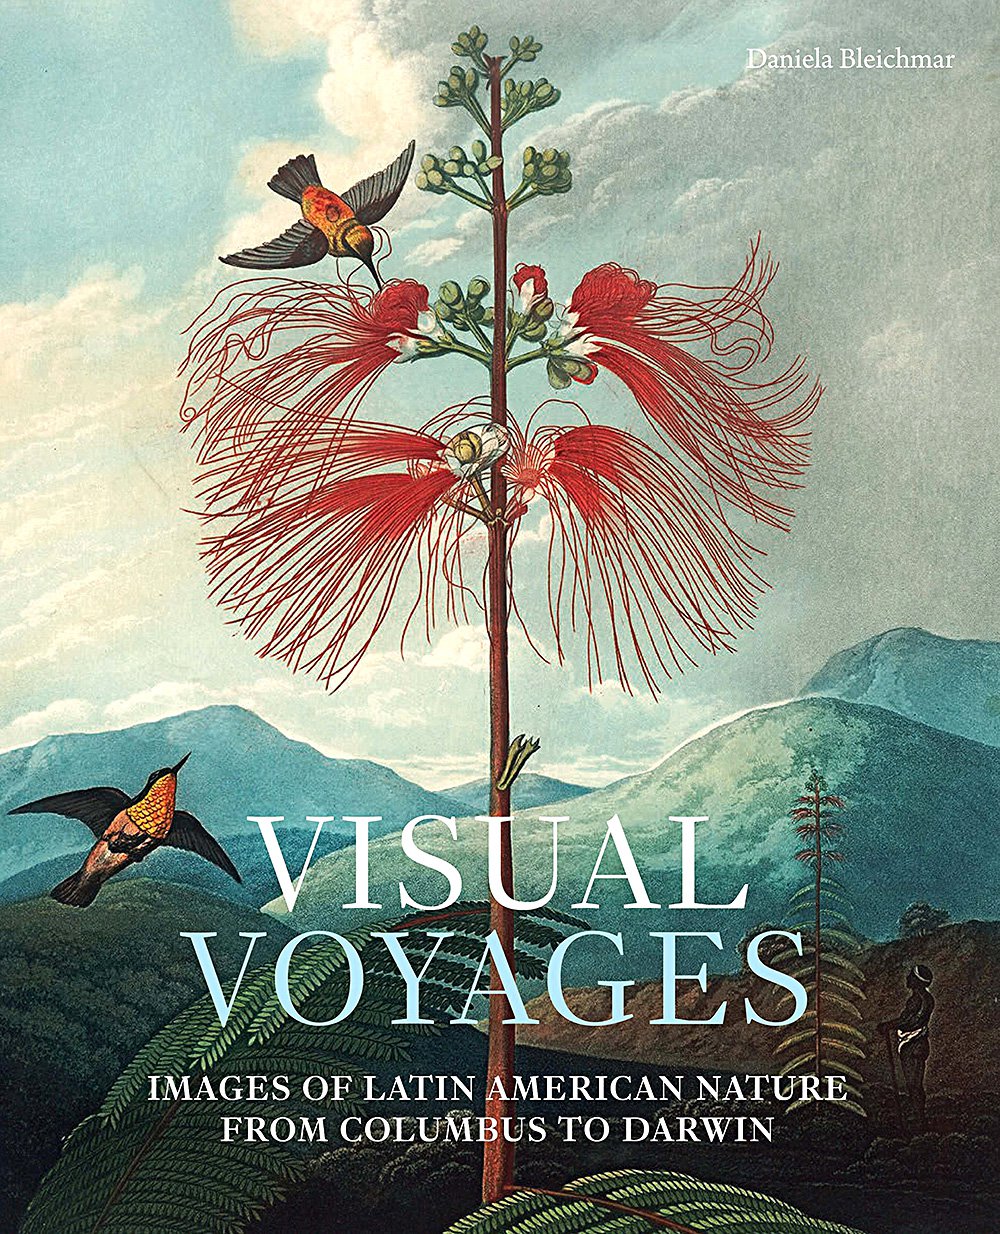 Daniela Bleichmar. Visual Voyages: Images of Latin American Nature from Columbus to Darwin. Yale University Press. 226 c. £40. На английском языке.